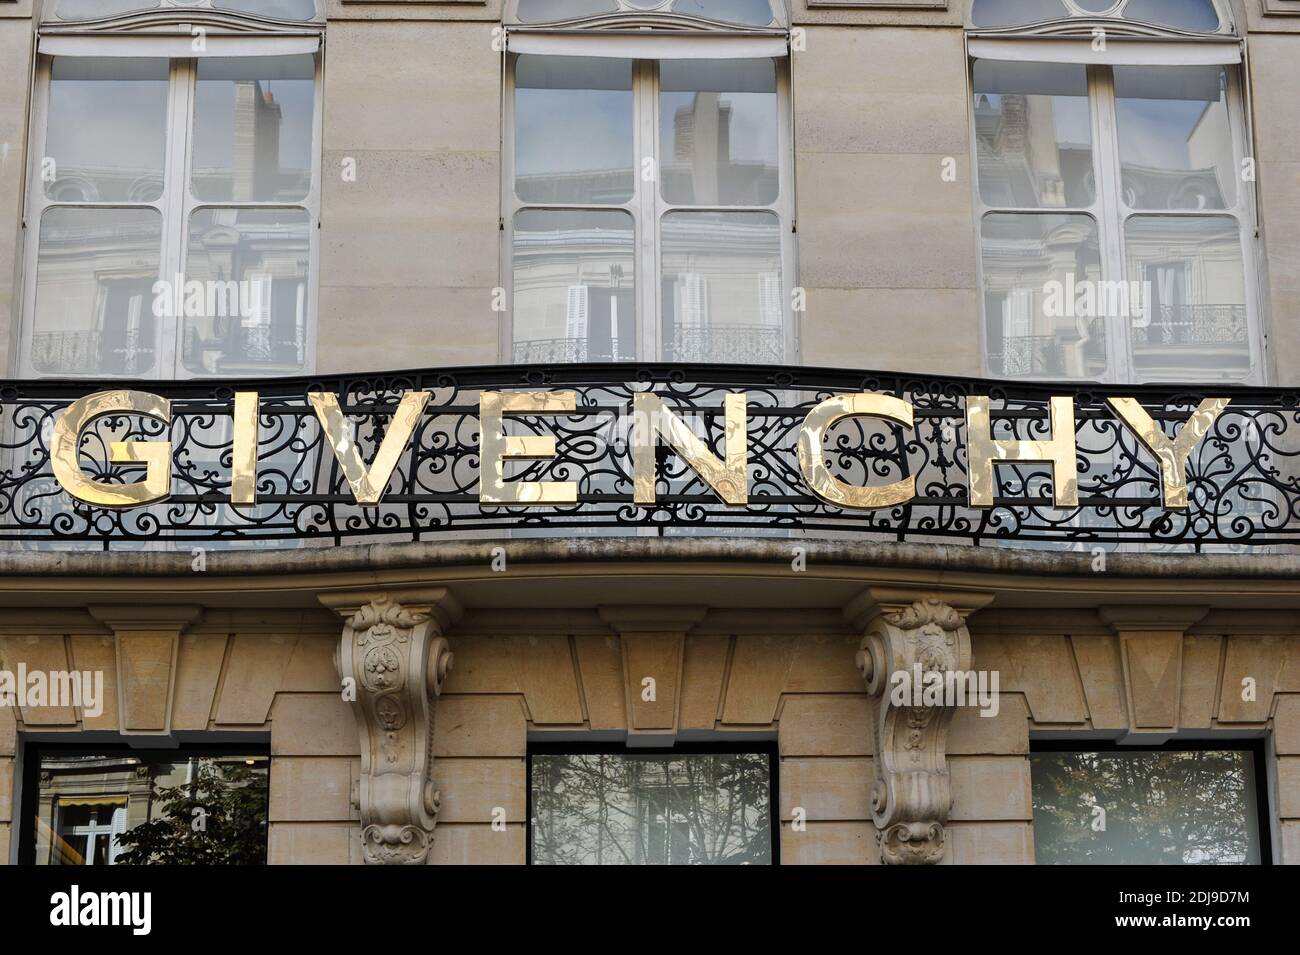 GIVENCHY a High-Couture house on Avenue George V in Paris, France on September 26, 2016. Photo by Bastien Guerche/ABACAPRESS.COM Stock Photo